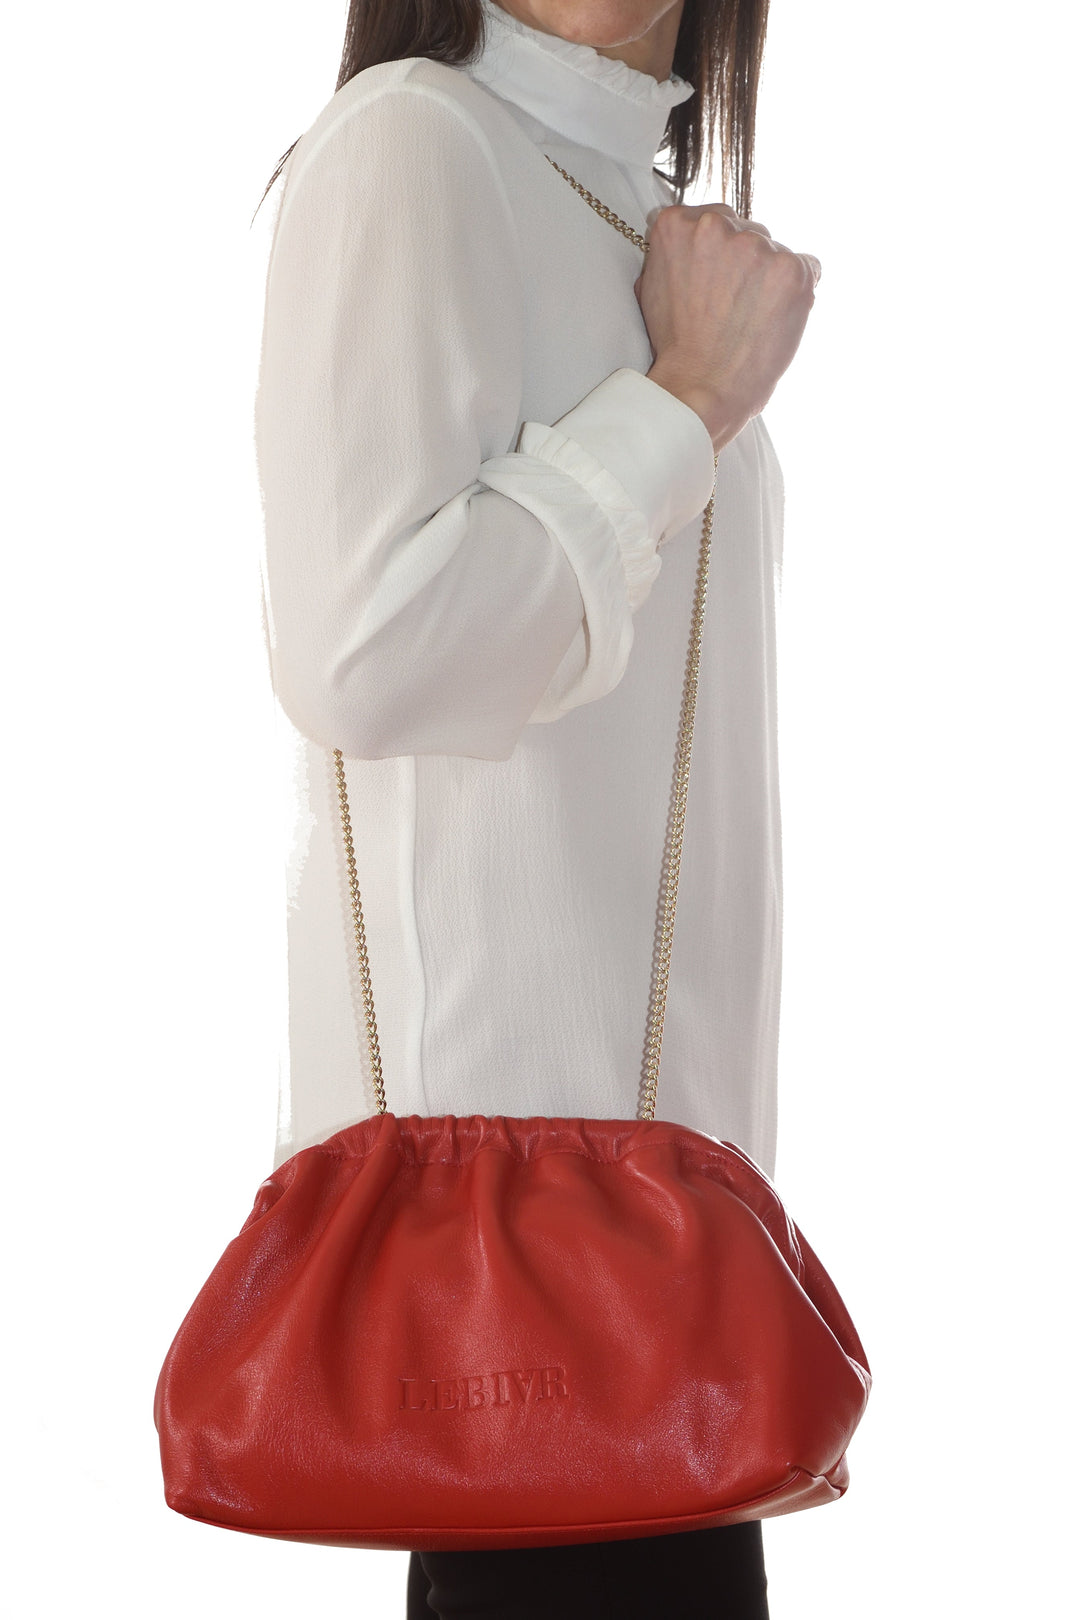 Woman holding a red leather handbag with a gold chain strap against a white background